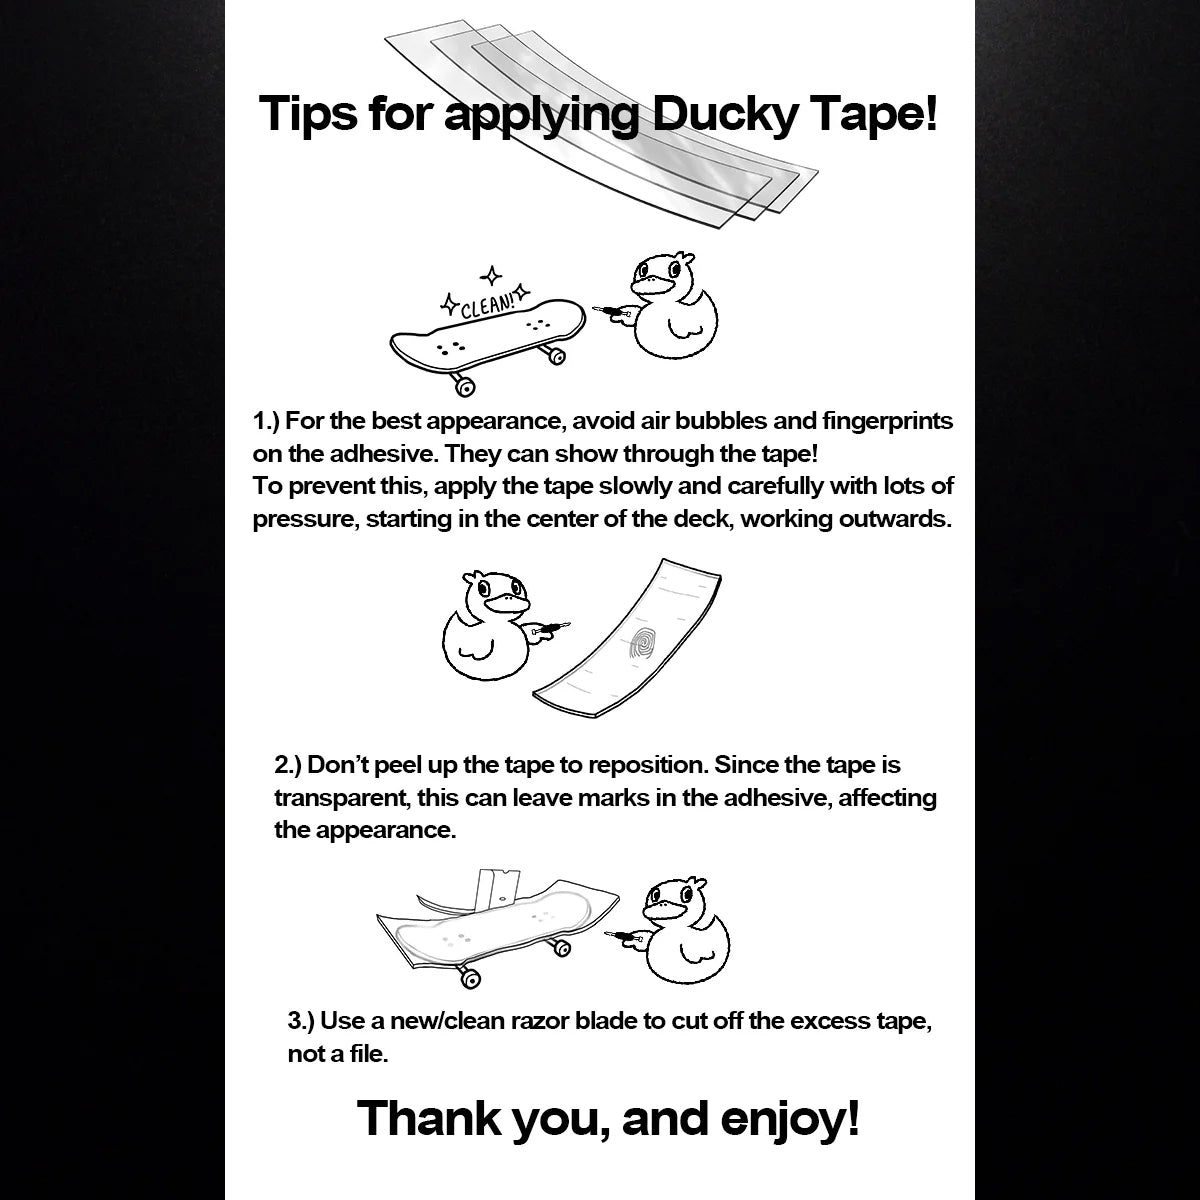 Ducky Tapes